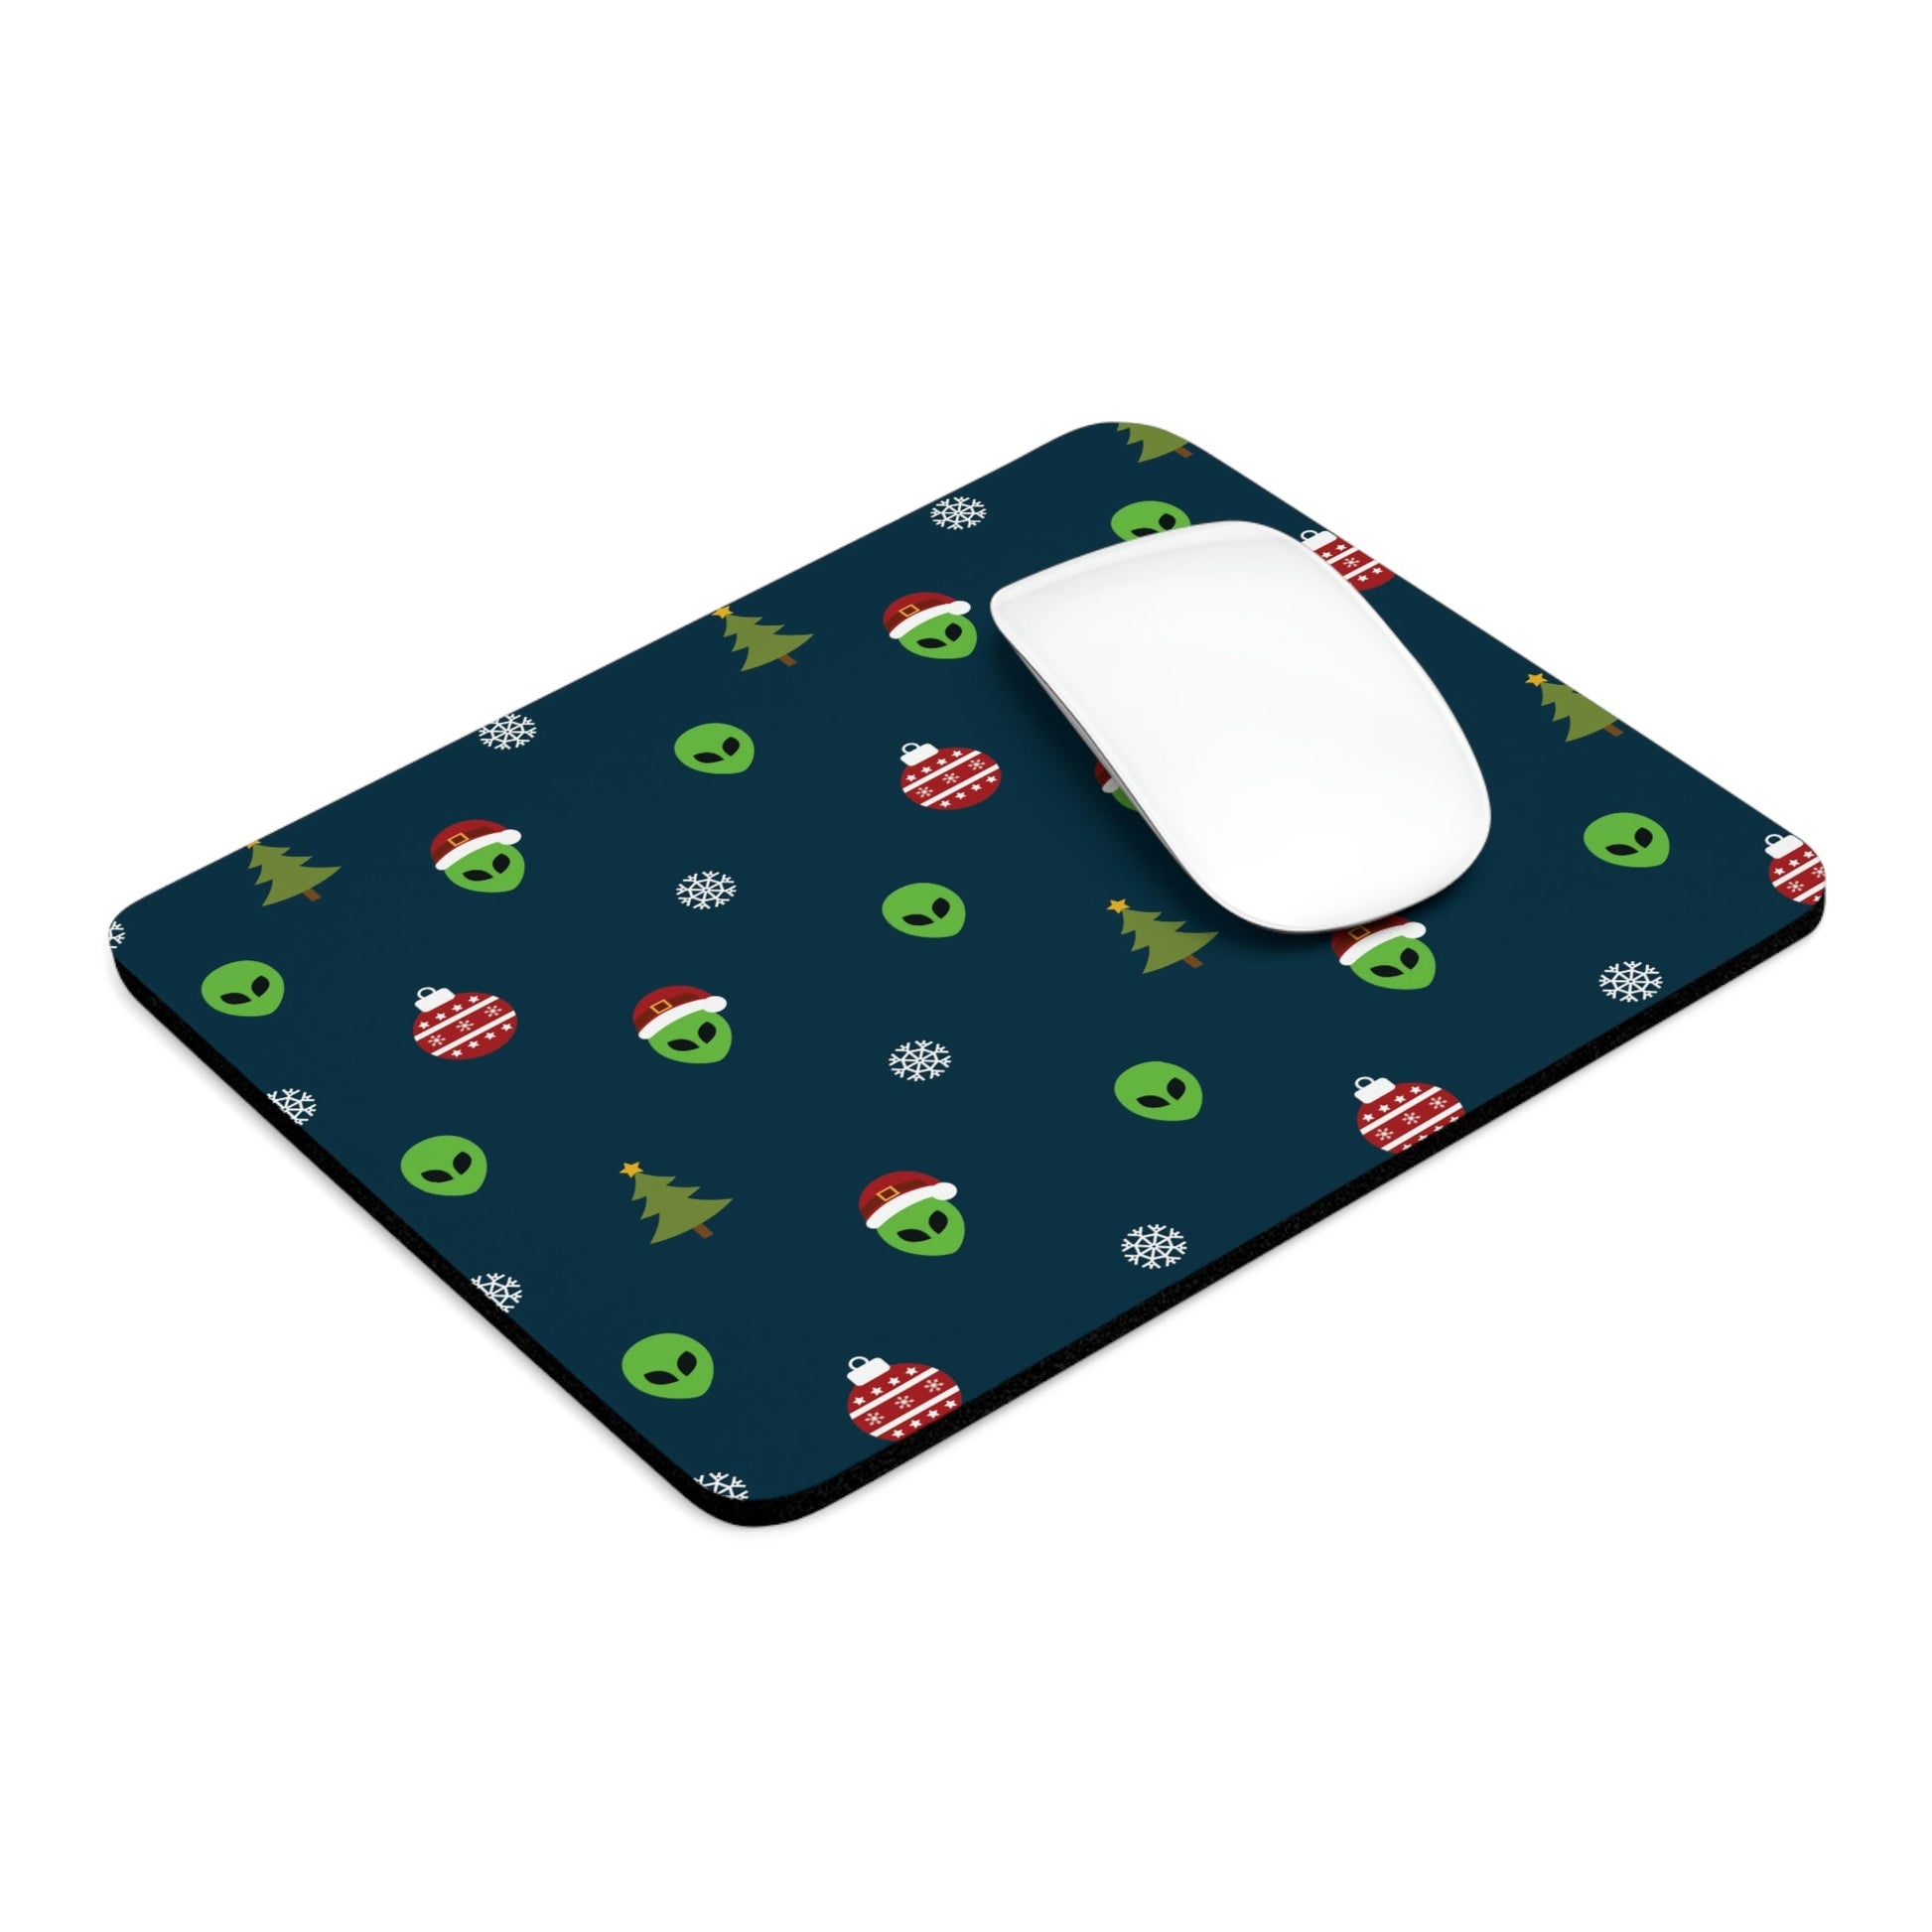 Space Pattern With Aliens UFO Movie Ergonomic Non-slip Creative Design Mouse Pad Ichaku [Perfect Gifts Selection]